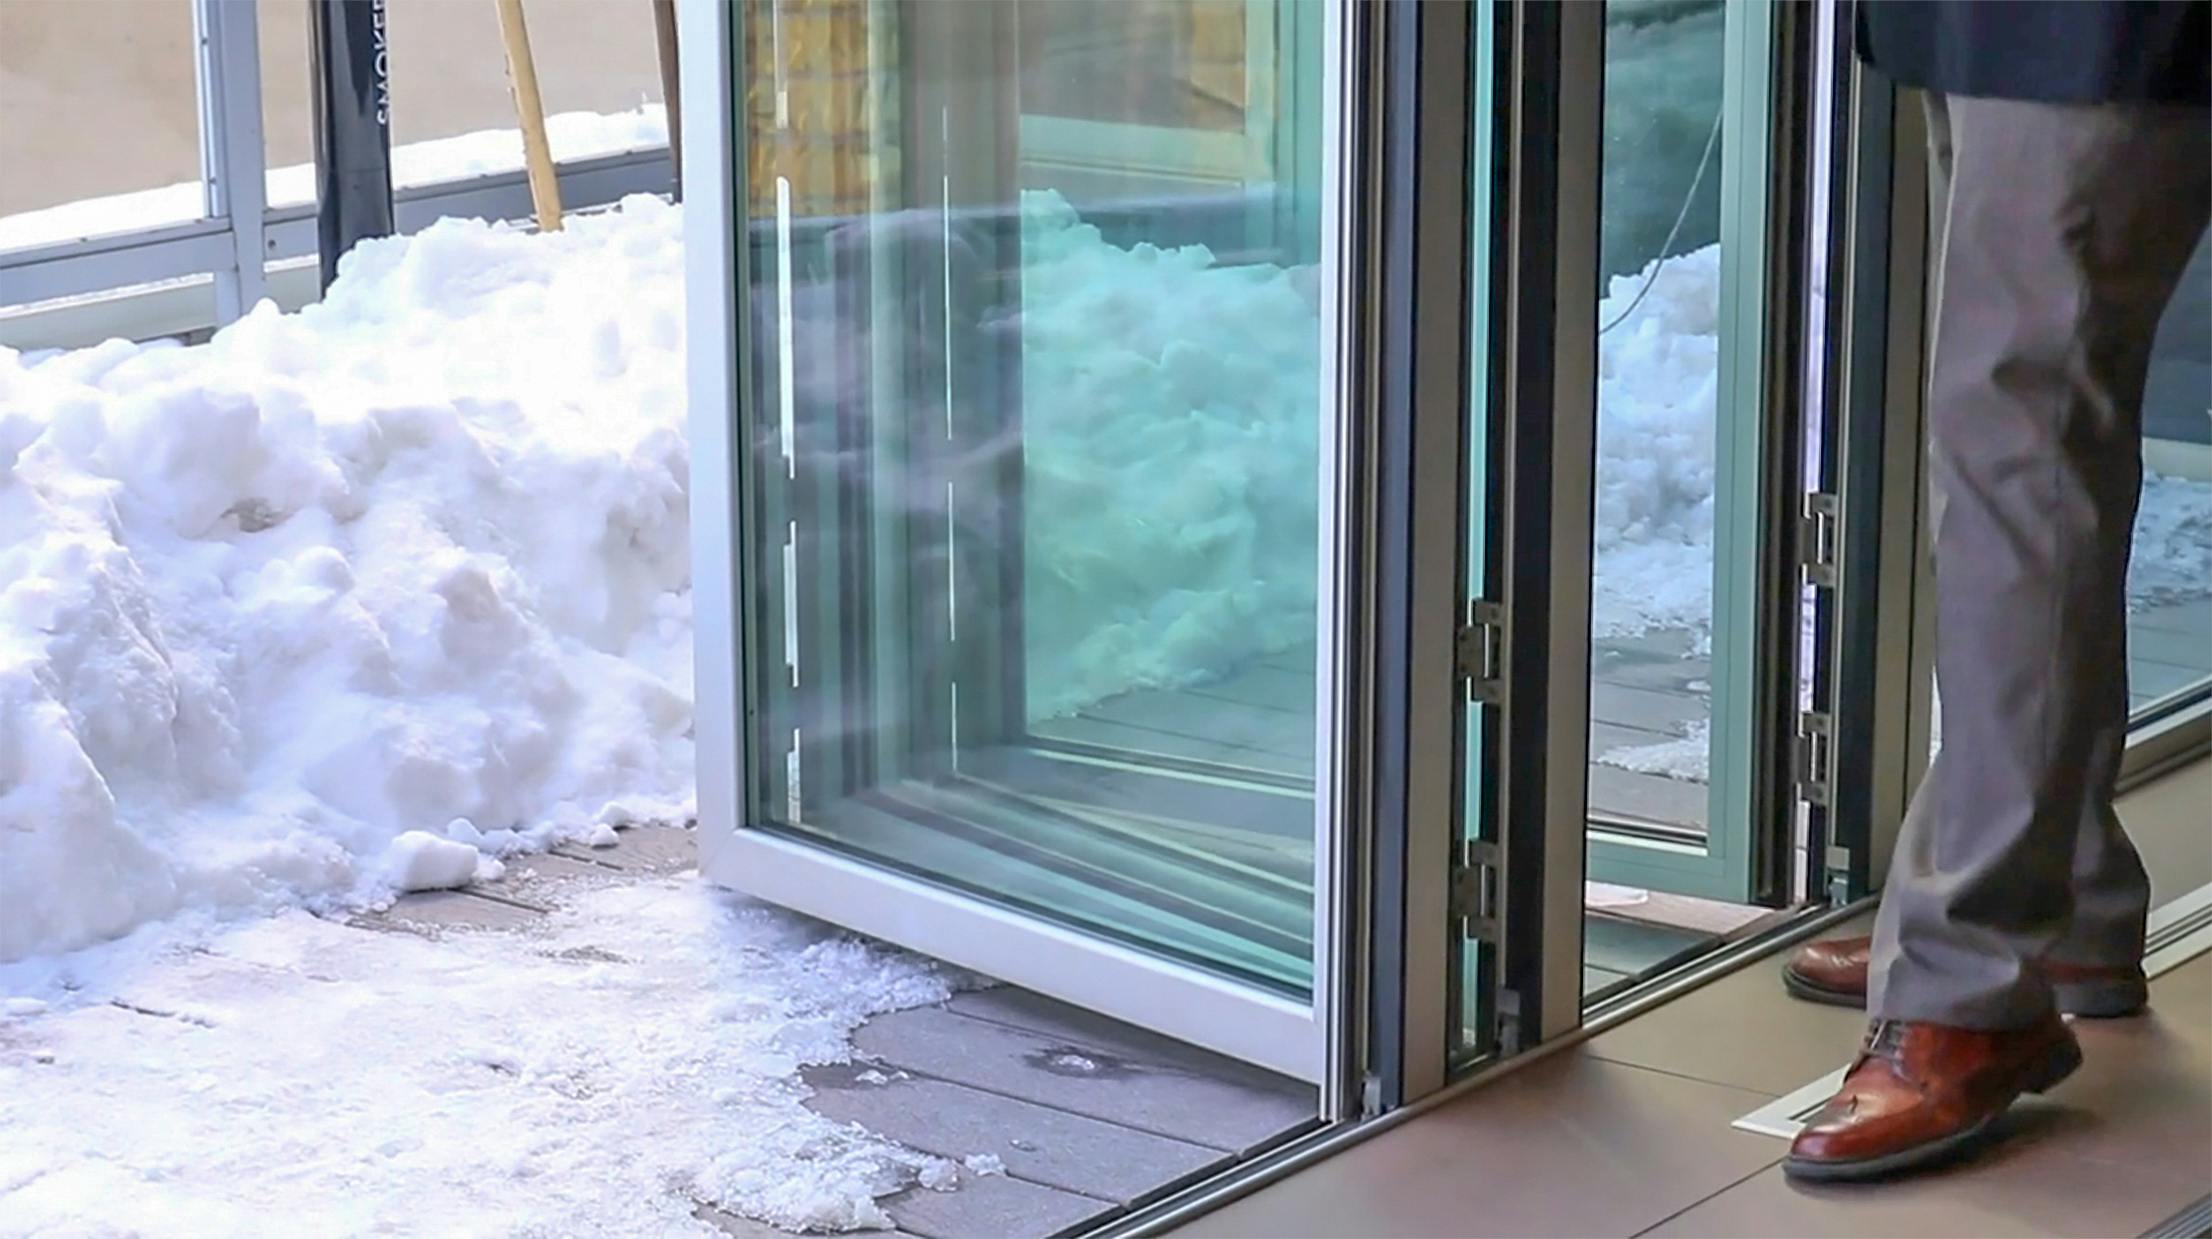 NanaWall accordion glass wall systems in snow